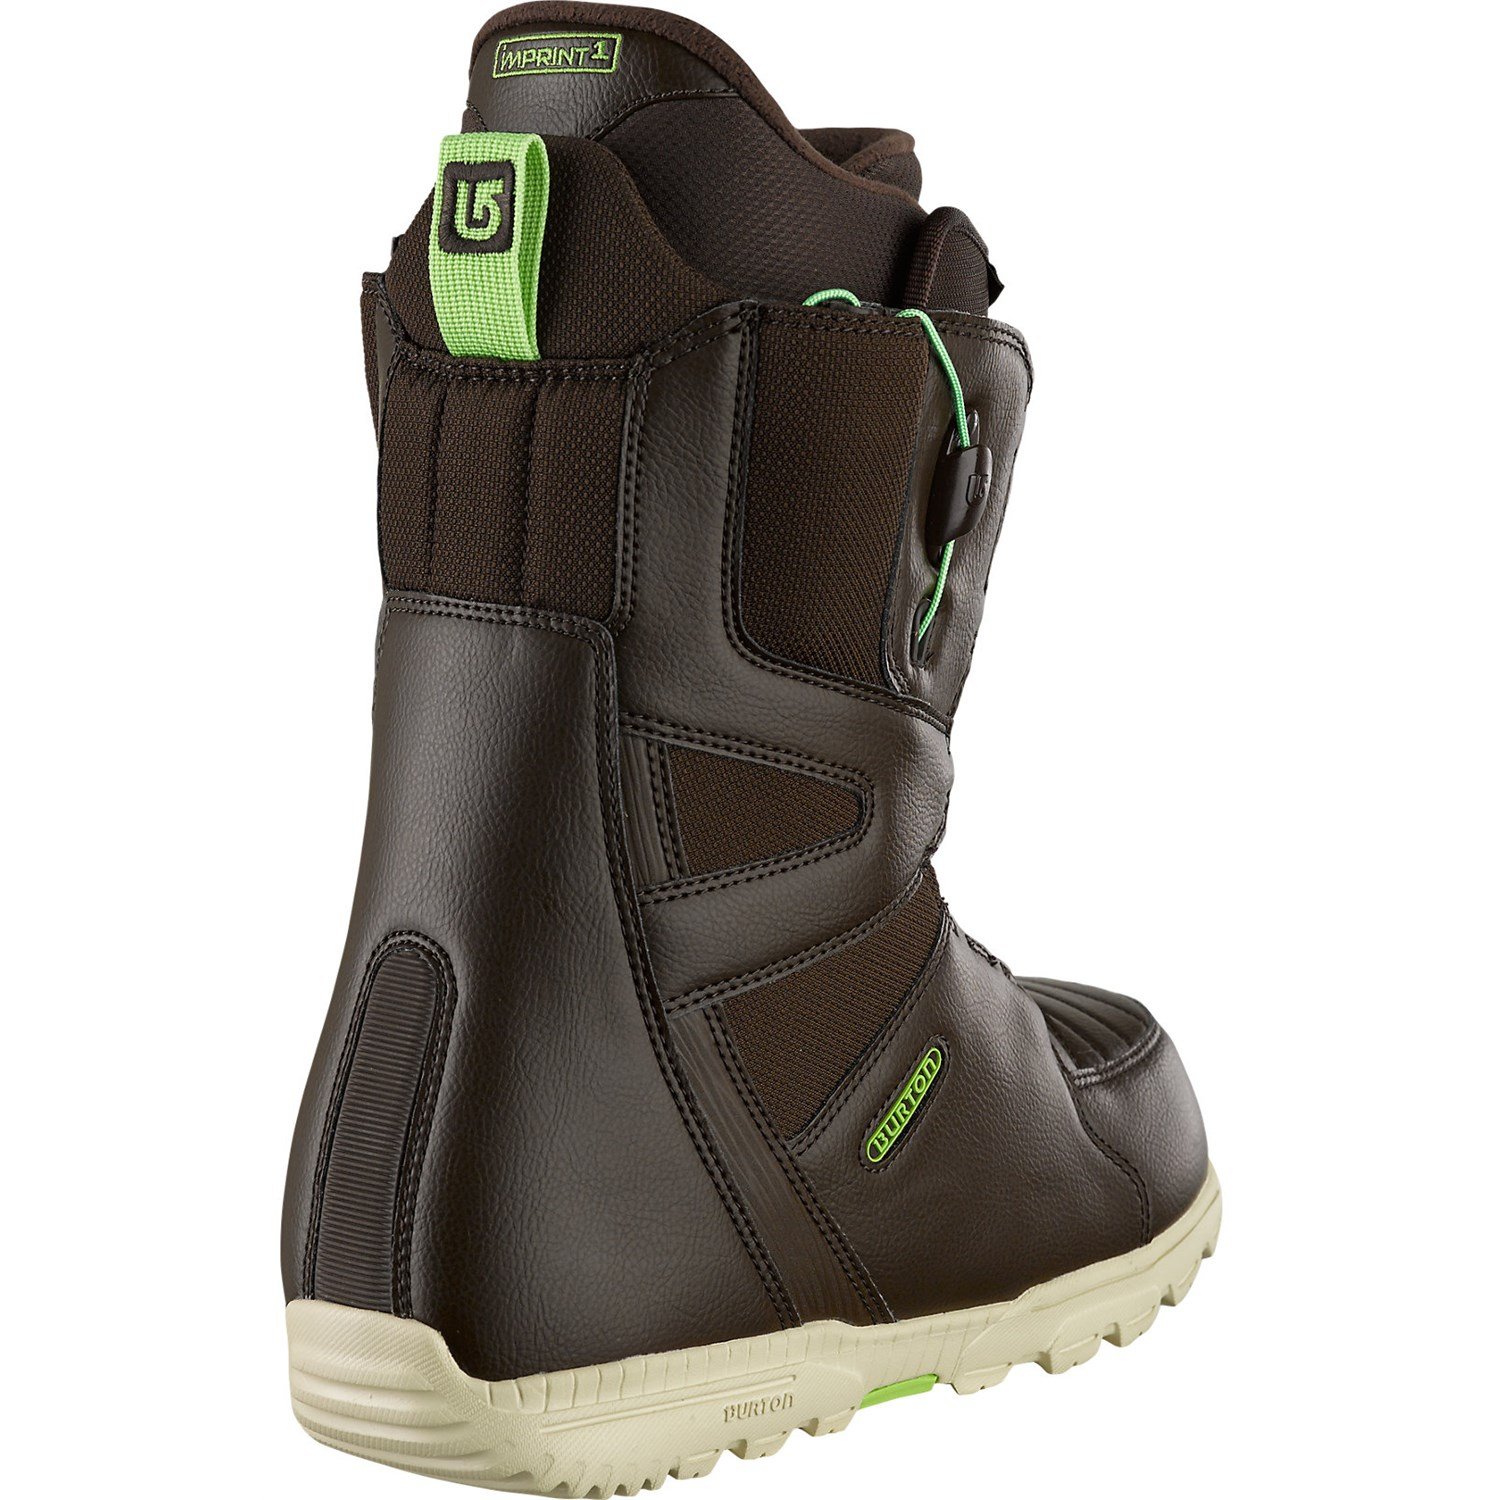 Burton Moto Snowboard Boots 2014 Evo with regard to The Most Awesome  how to loosen snowboard boots for Wish